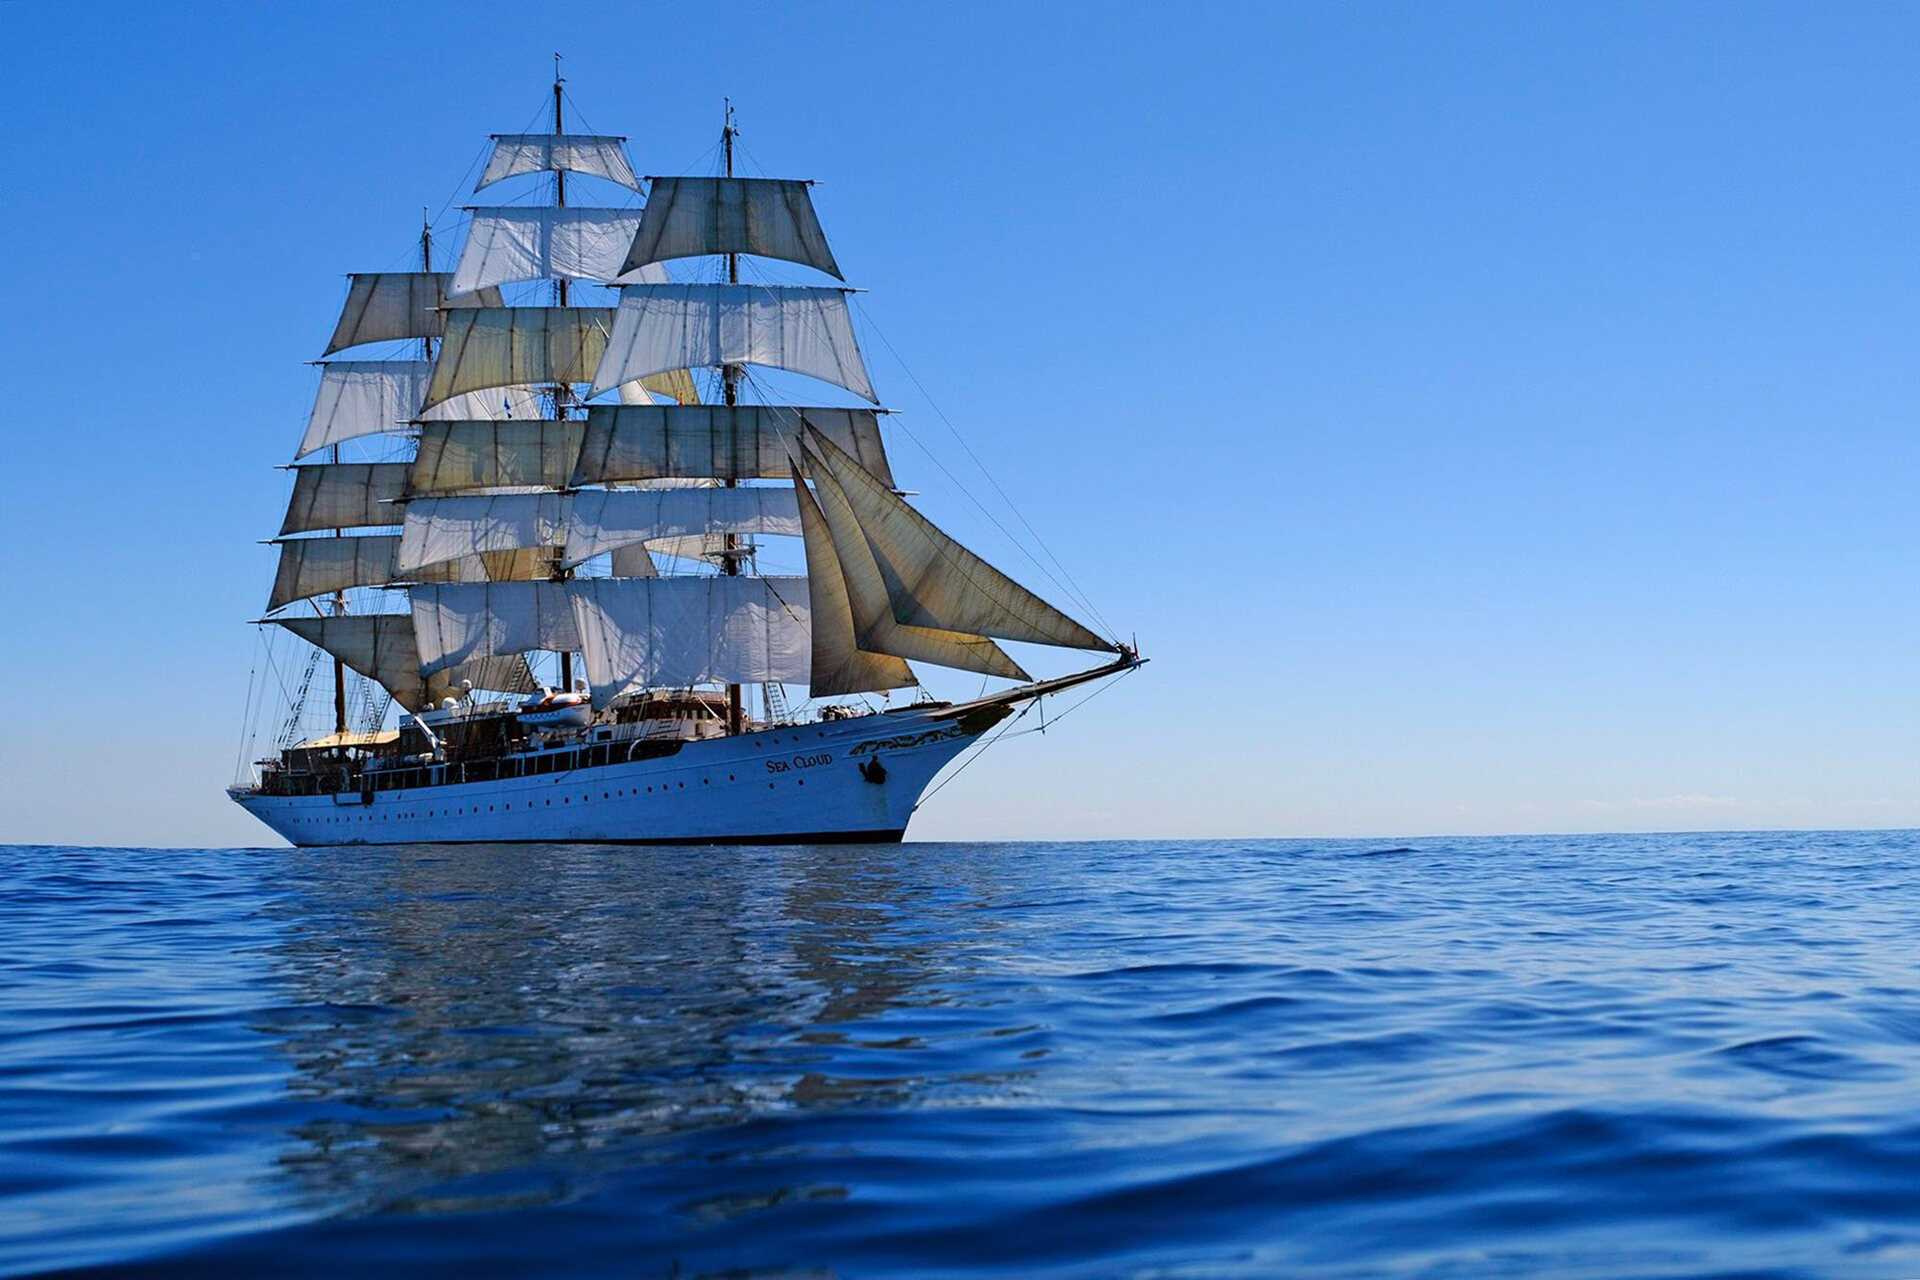 a tall-masted sailing ship against blue sky and smooth water